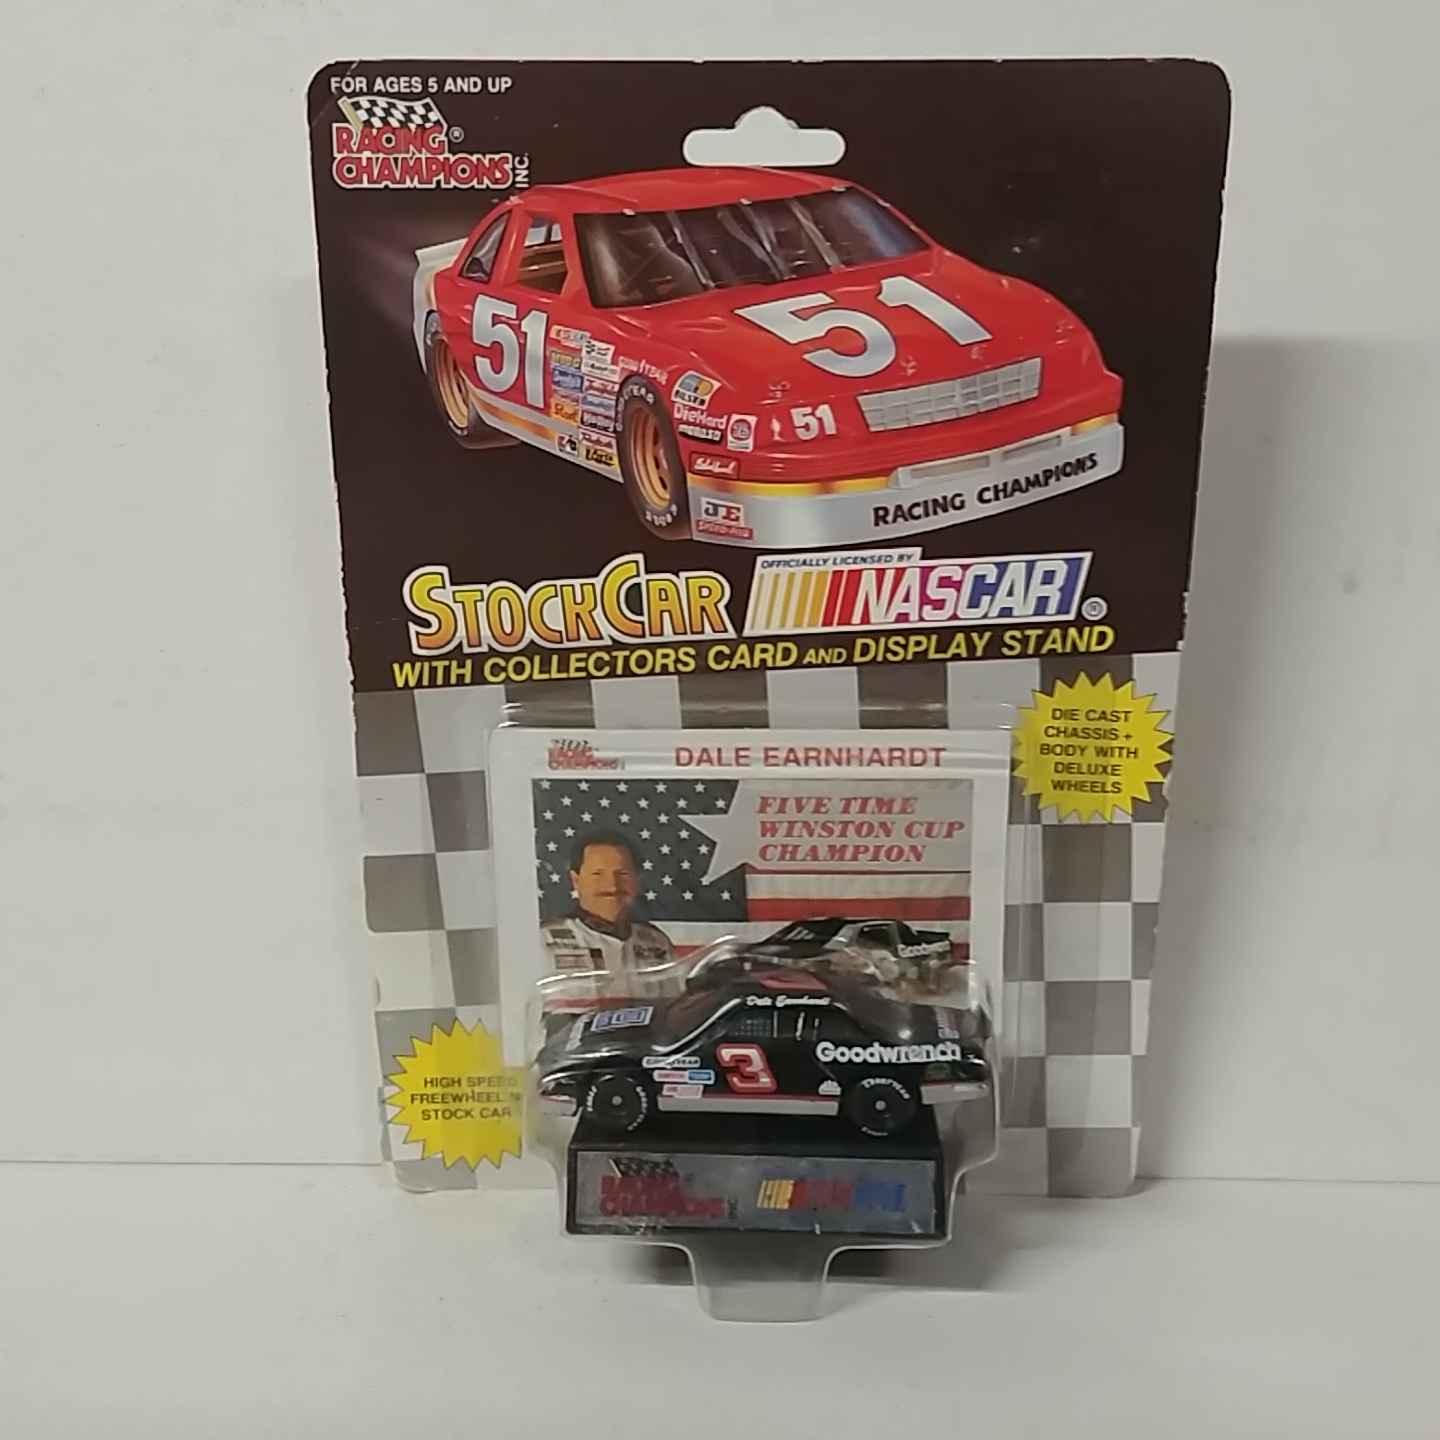 1992 Dale Earnhardt 1/64th Goodwrench "Five Time Champion" car